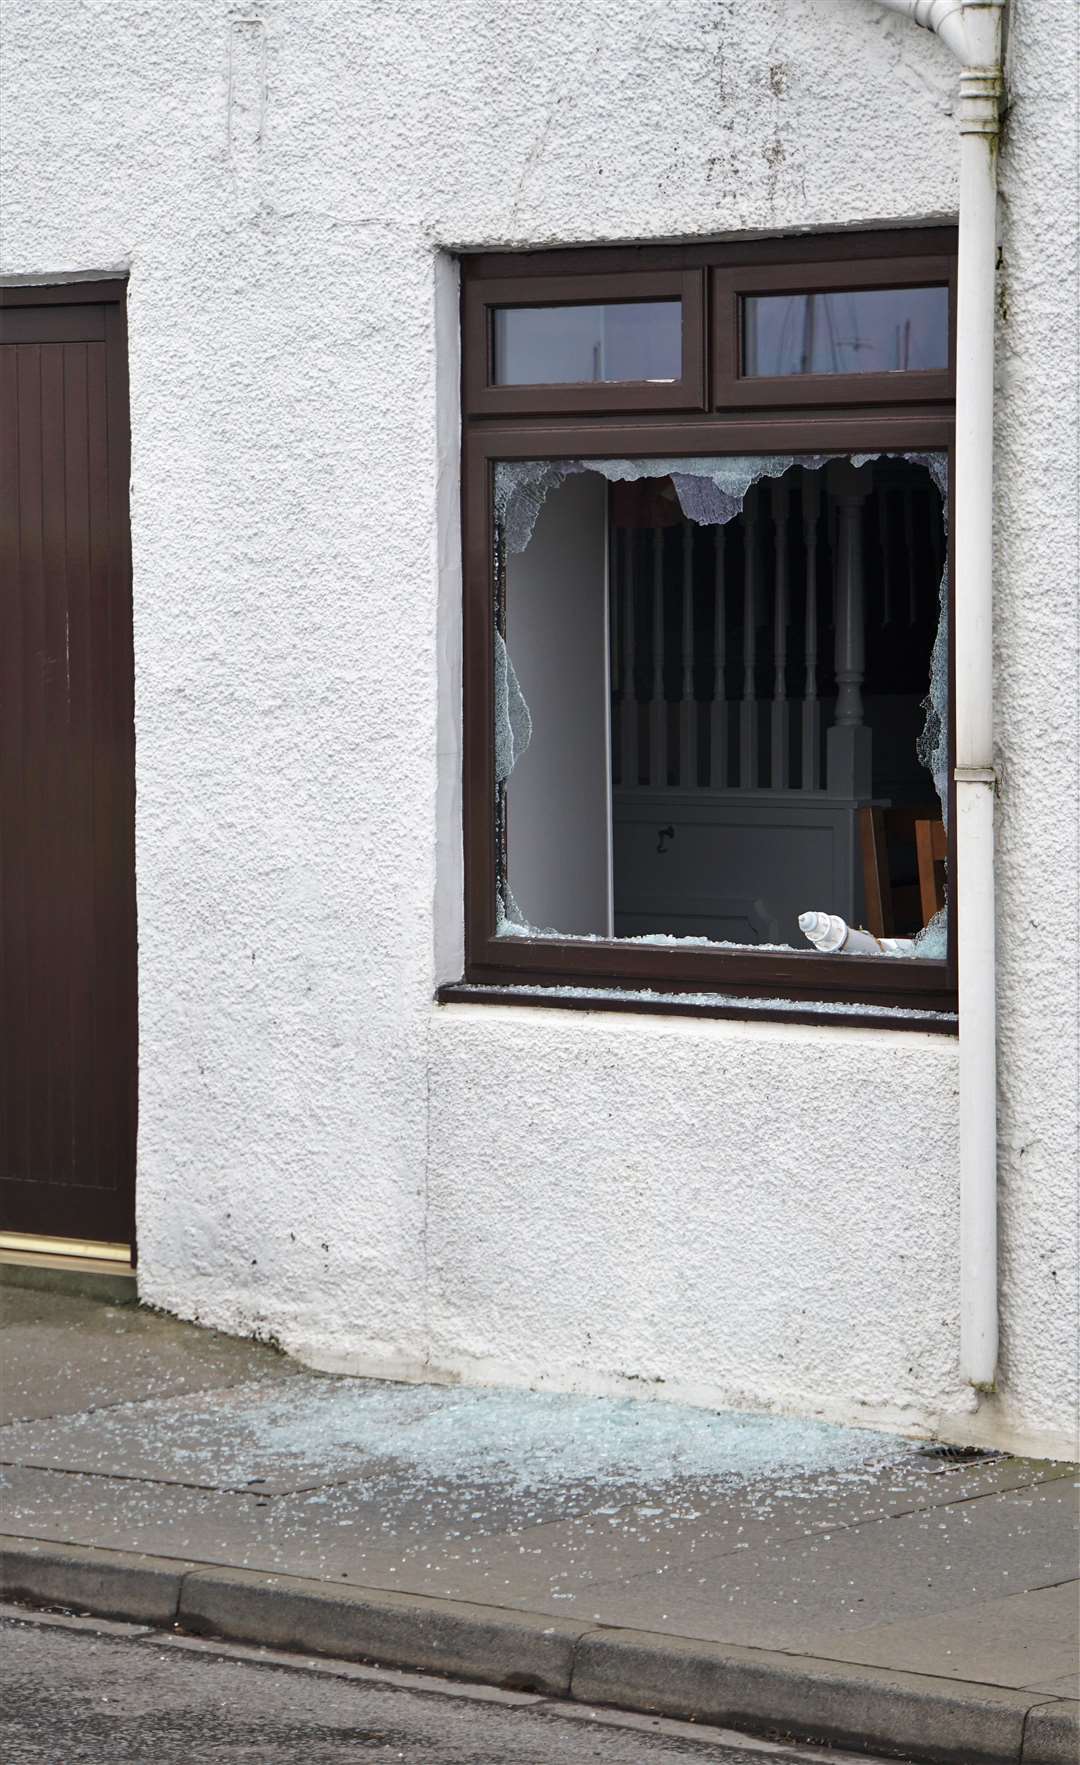 Window smashed at the area where entry to the premises was presumably made. Pictures: DGS